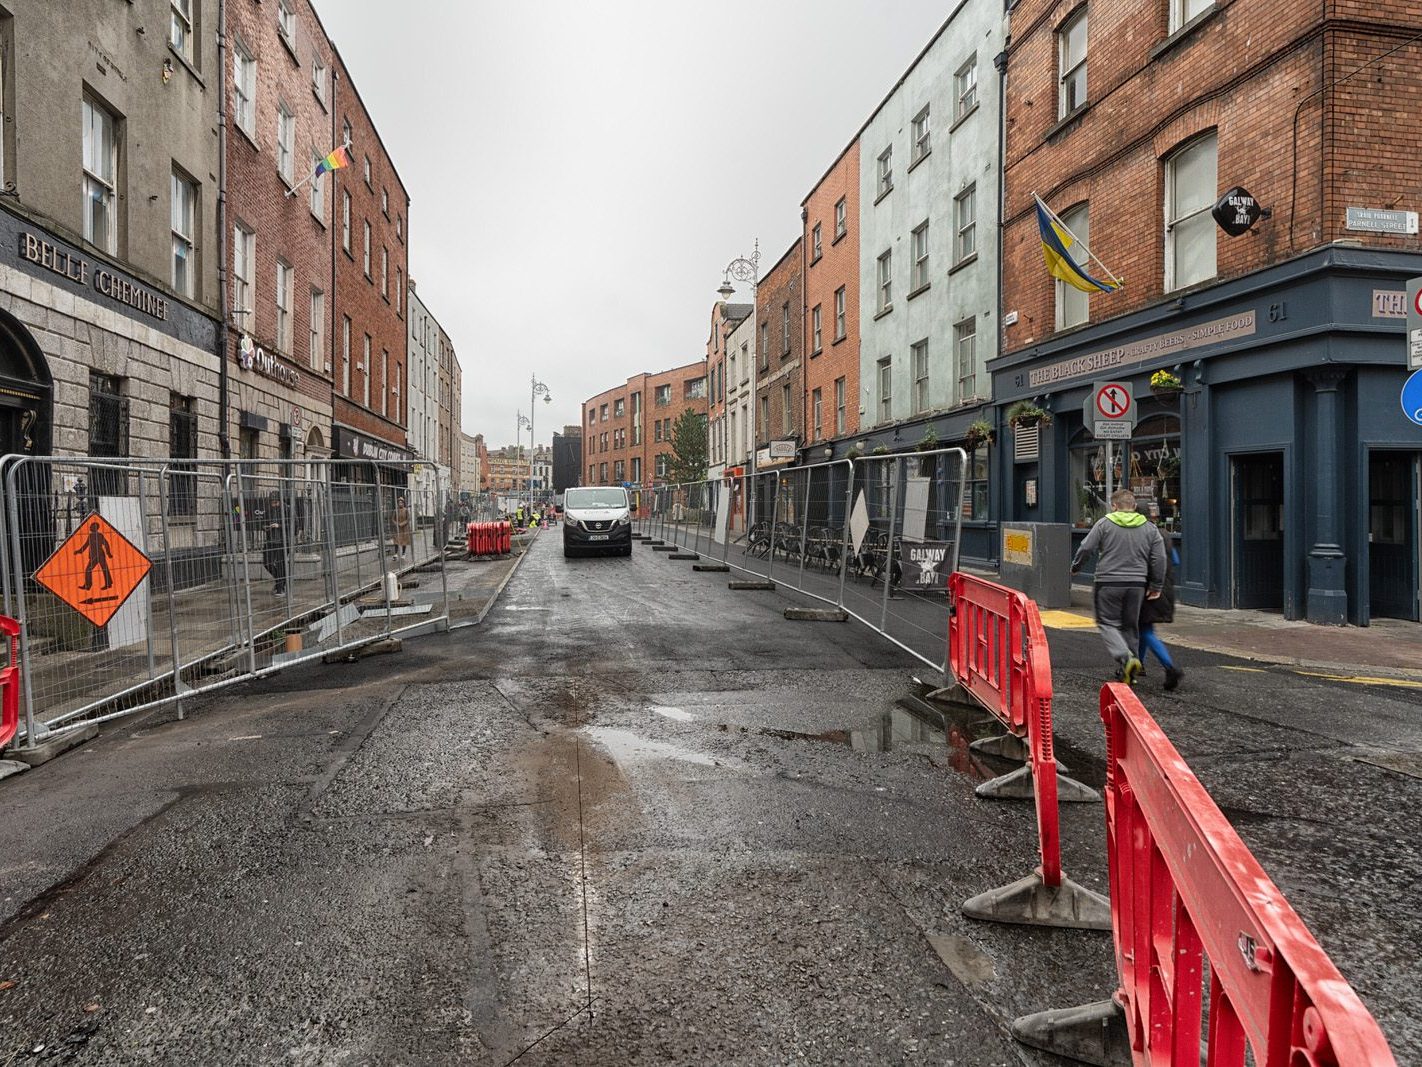 CAPEL STREET ON A DULL WET DAY [INTERIM CAPEL STREET IMPROVEMENT WORKS ARE NOW ONGOING] 010